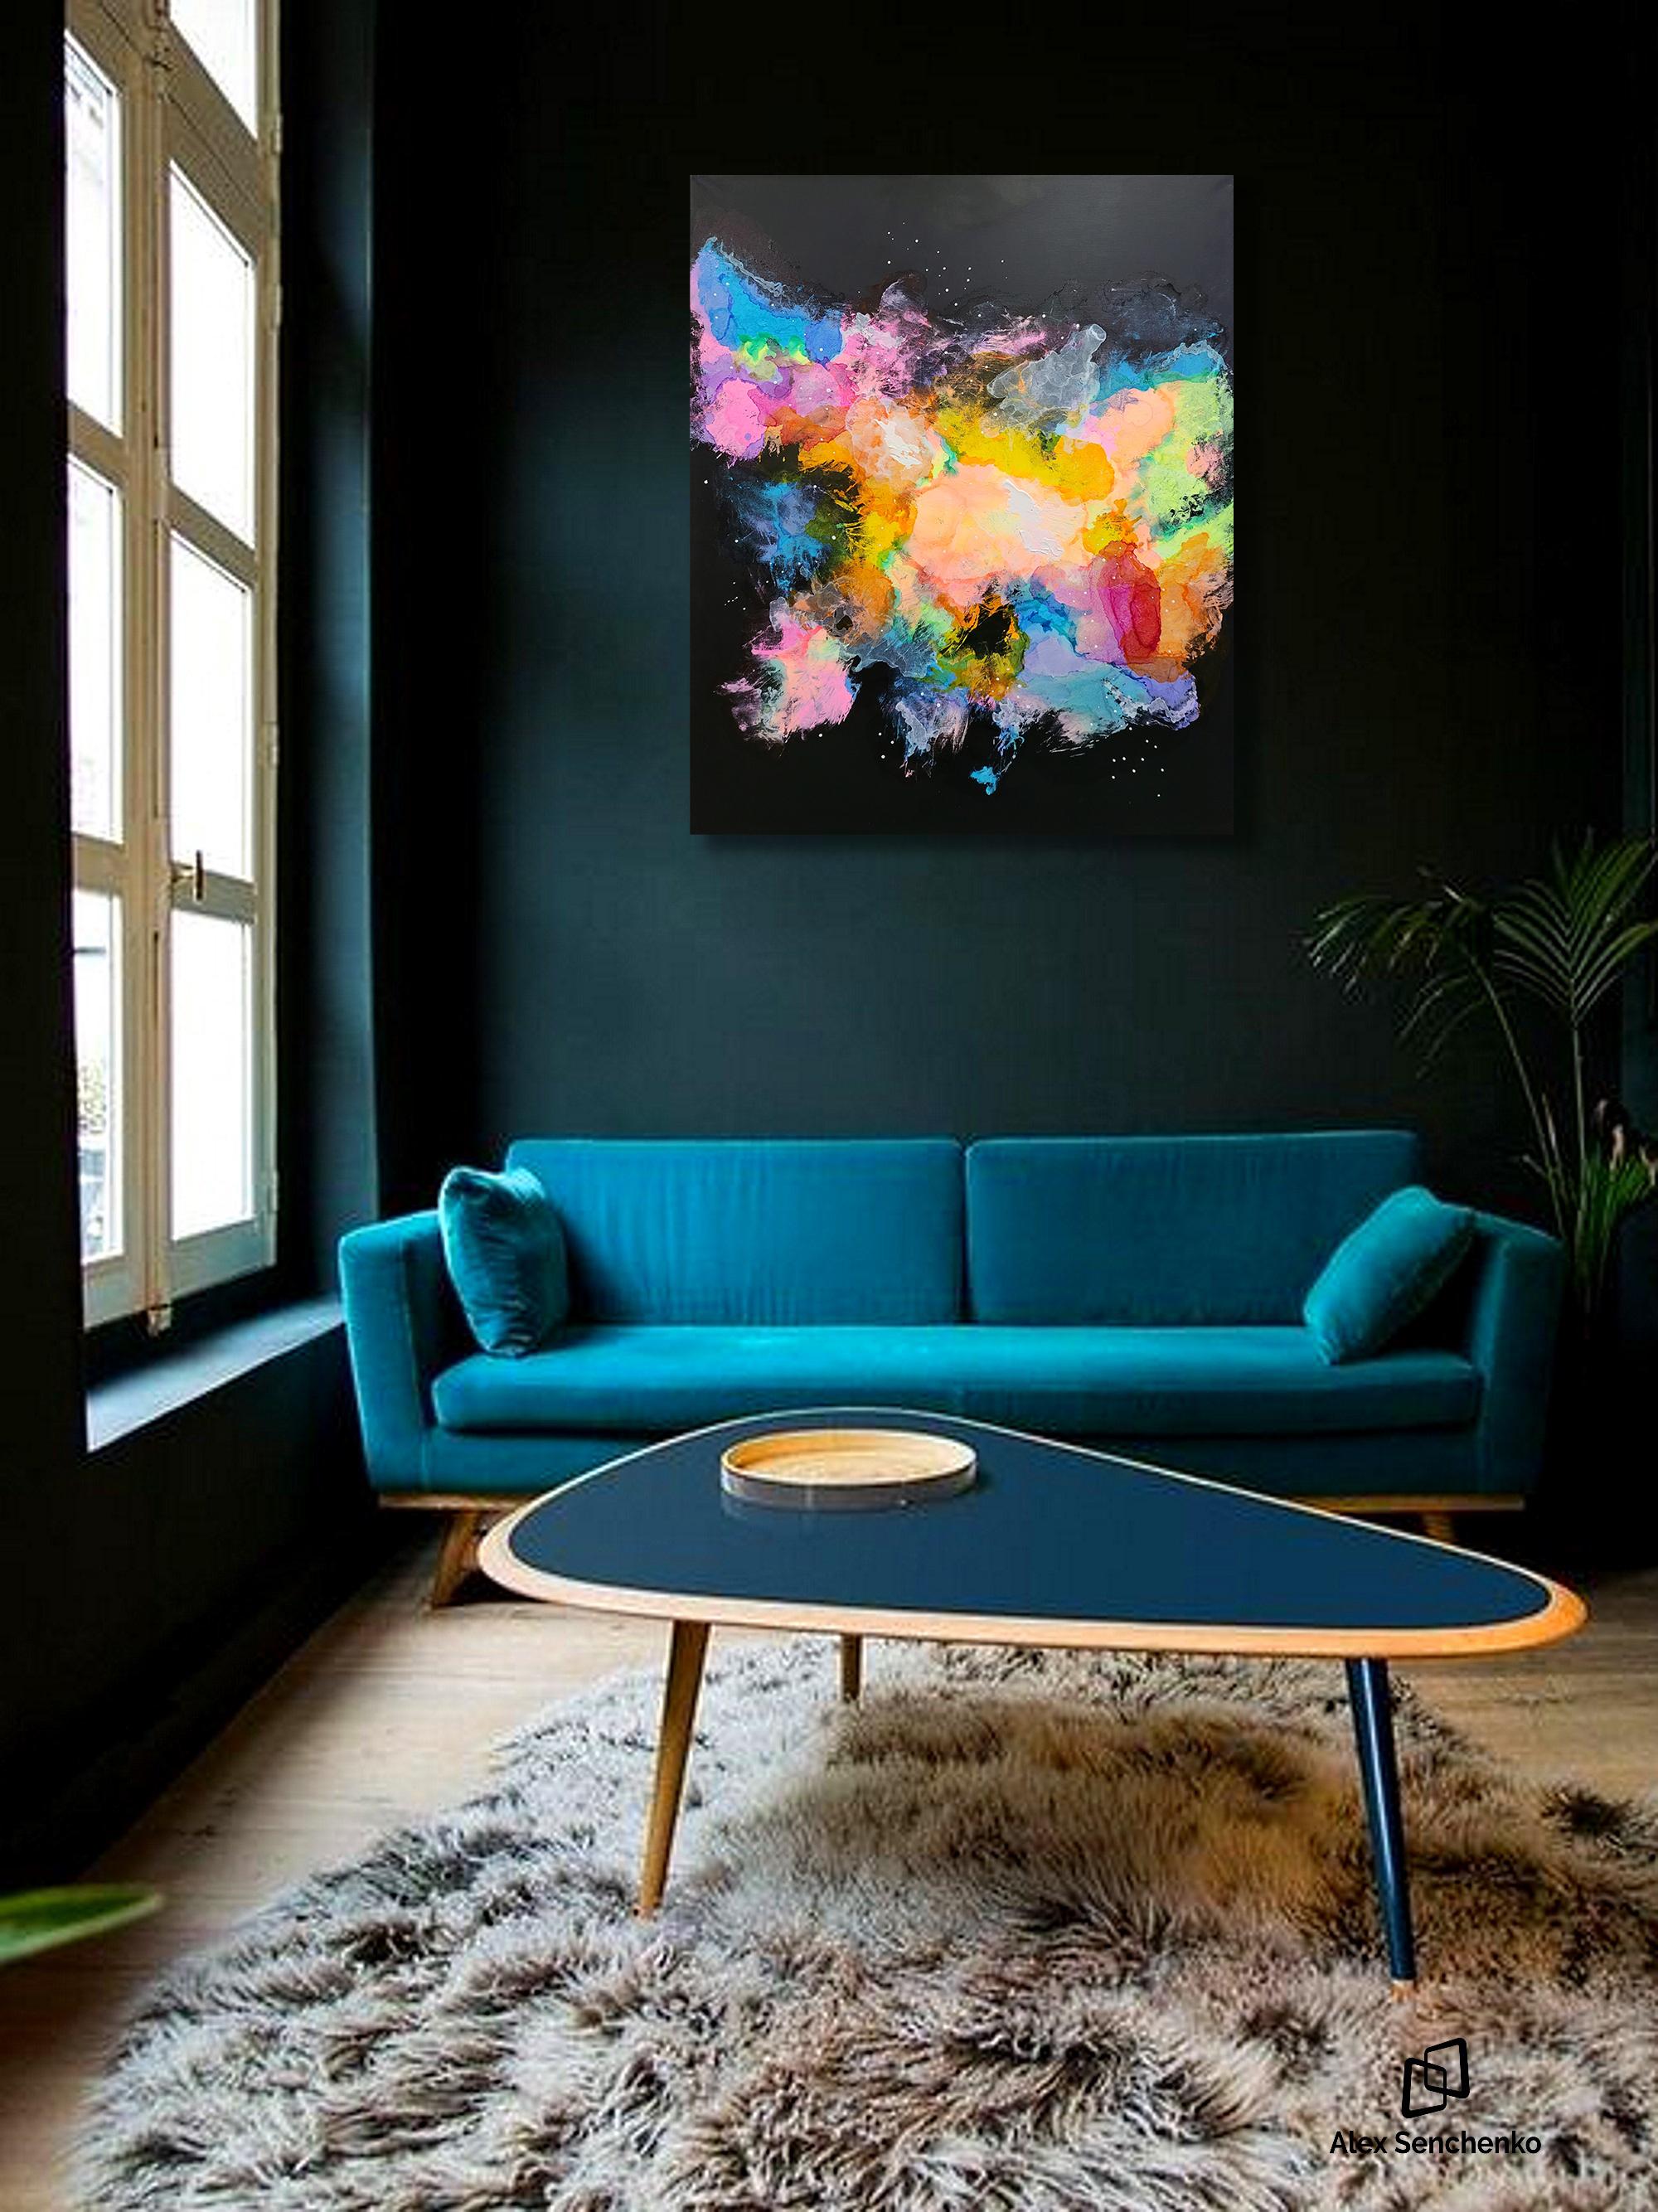 A great way to bring abstract colors into any room! This fine painting is an original piece of
artwork stretched on canvas that can be hung on the wall to make your wall looks
stunning. This artwork would look contemporary in any room to add